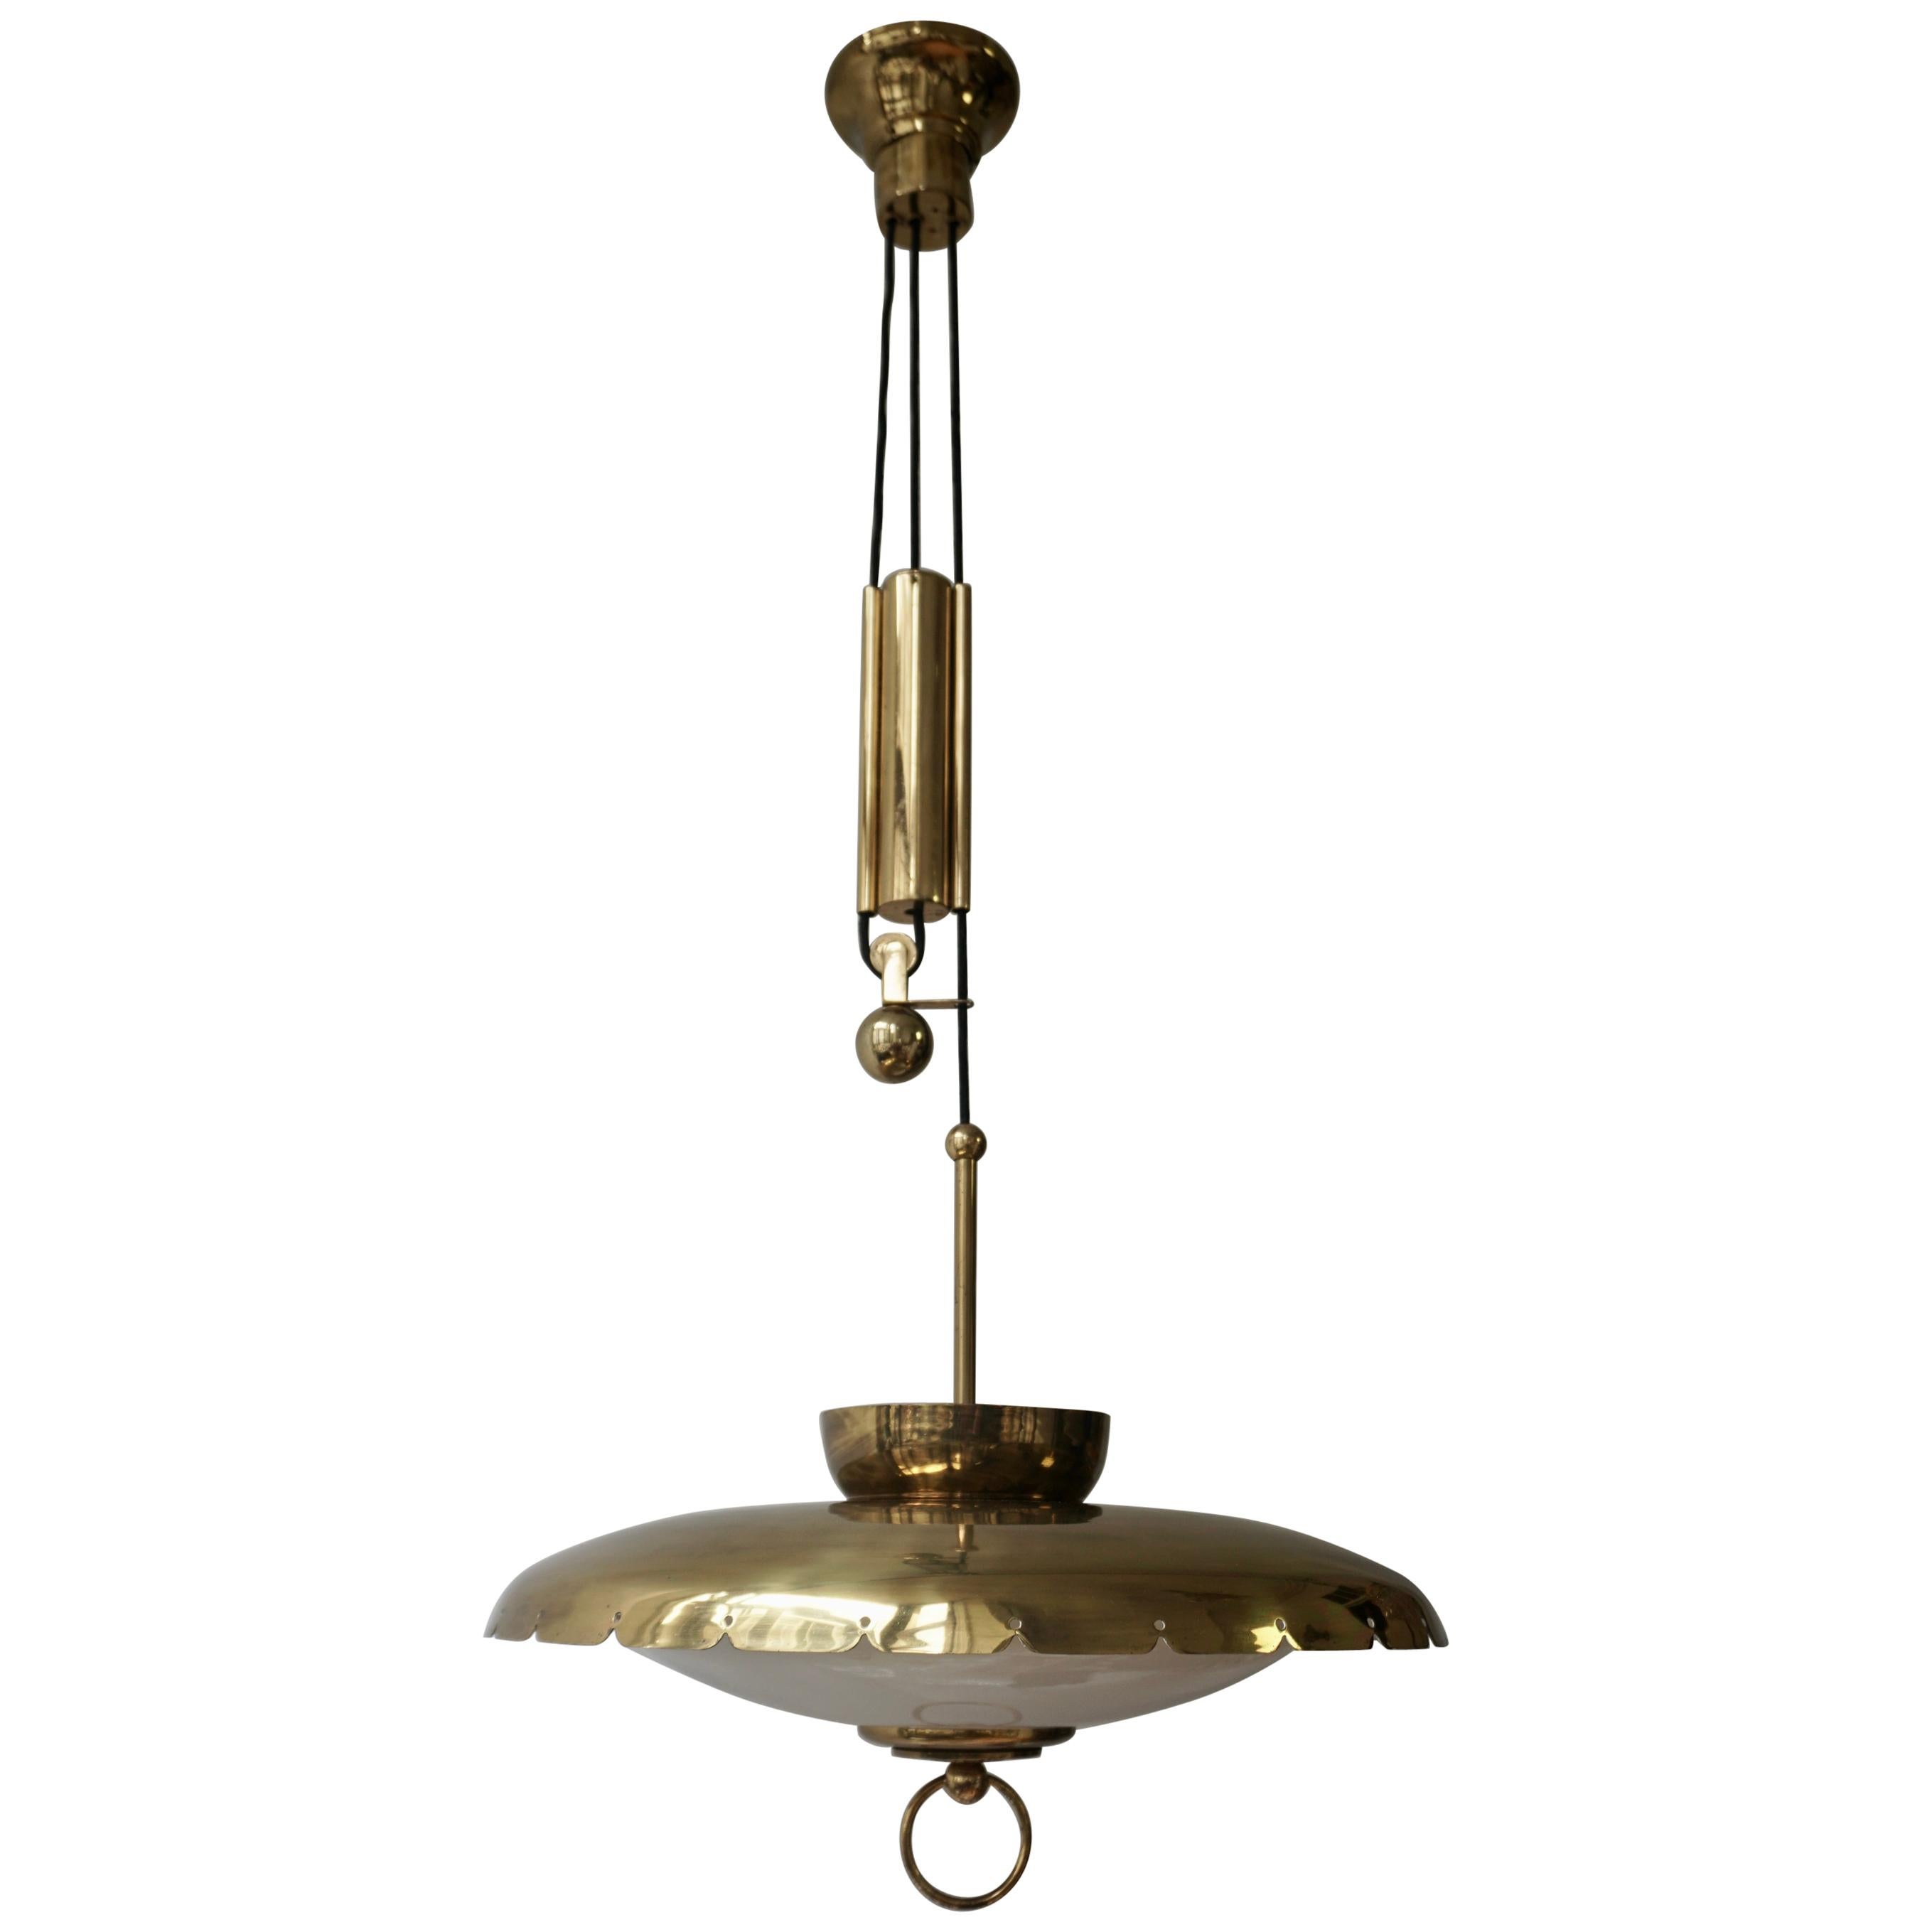 Midcentury Adjustable Counterweight Brass and Glass Pendant Lamp, 1960s 1970s